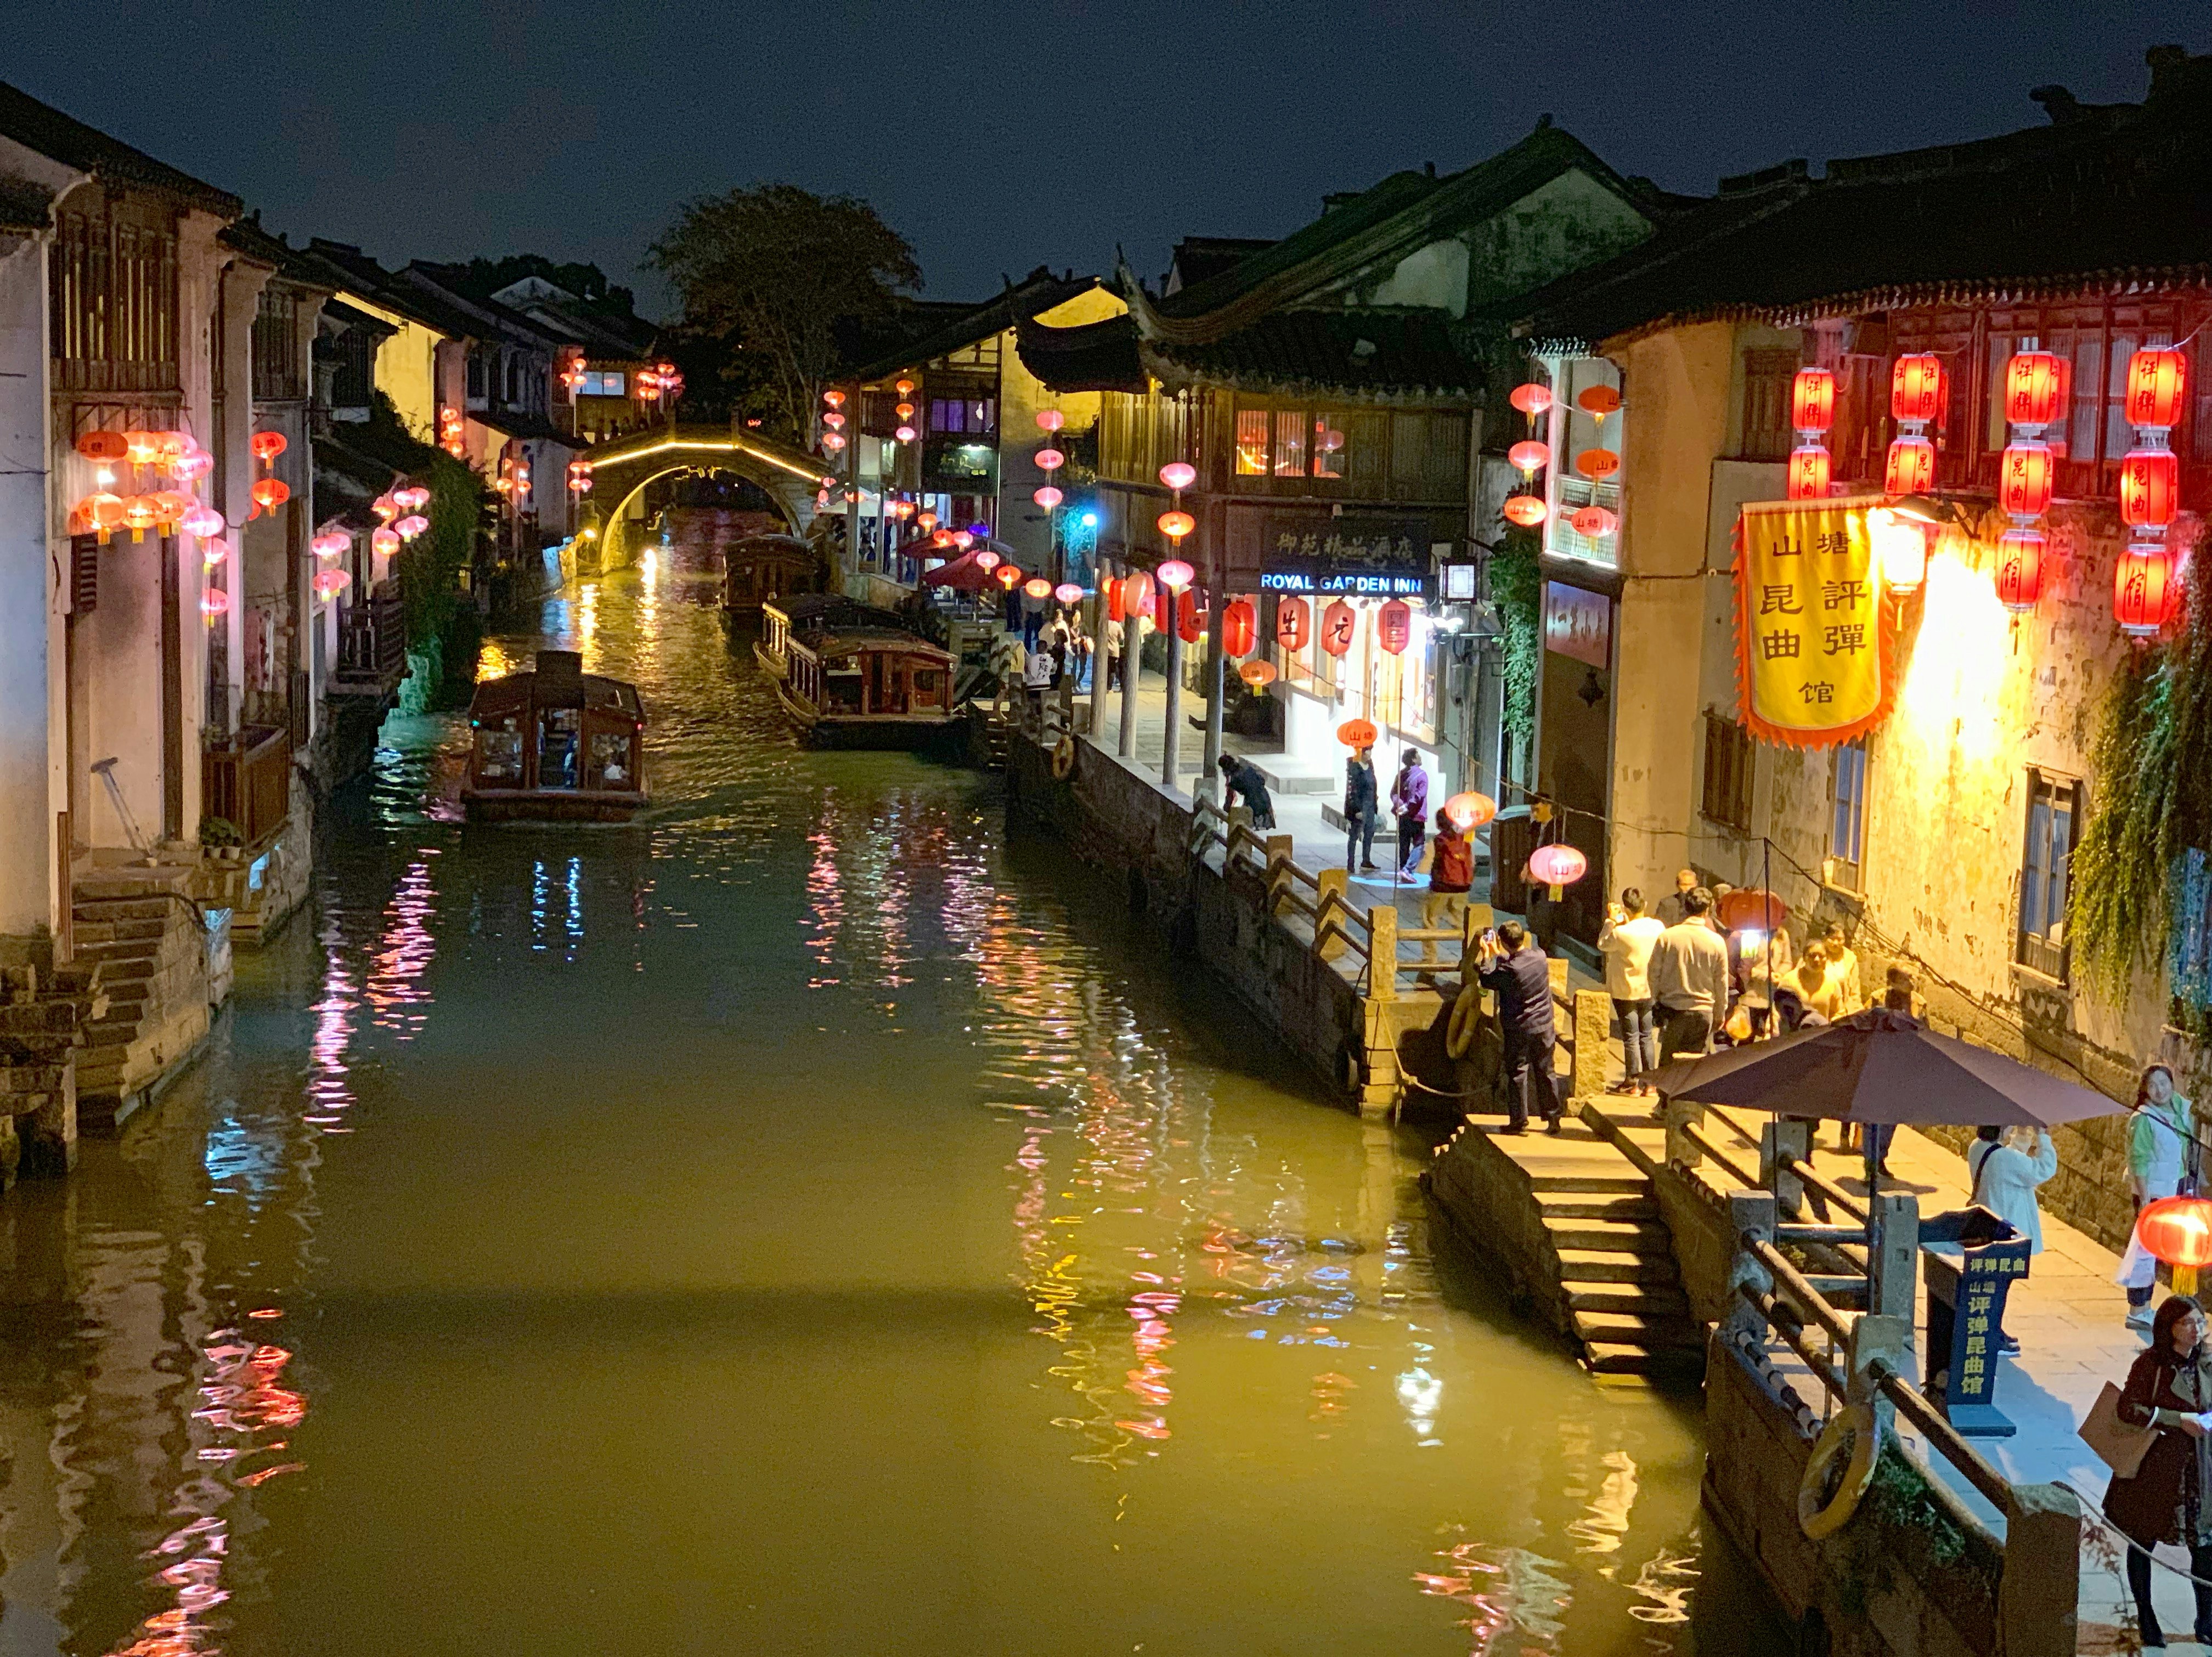 A view of one of Suzhou's canals at night. The waterway is dark while the buildings around the narrow canal are lit up by lanterns and lights. A few wooden boats travel down the canal.